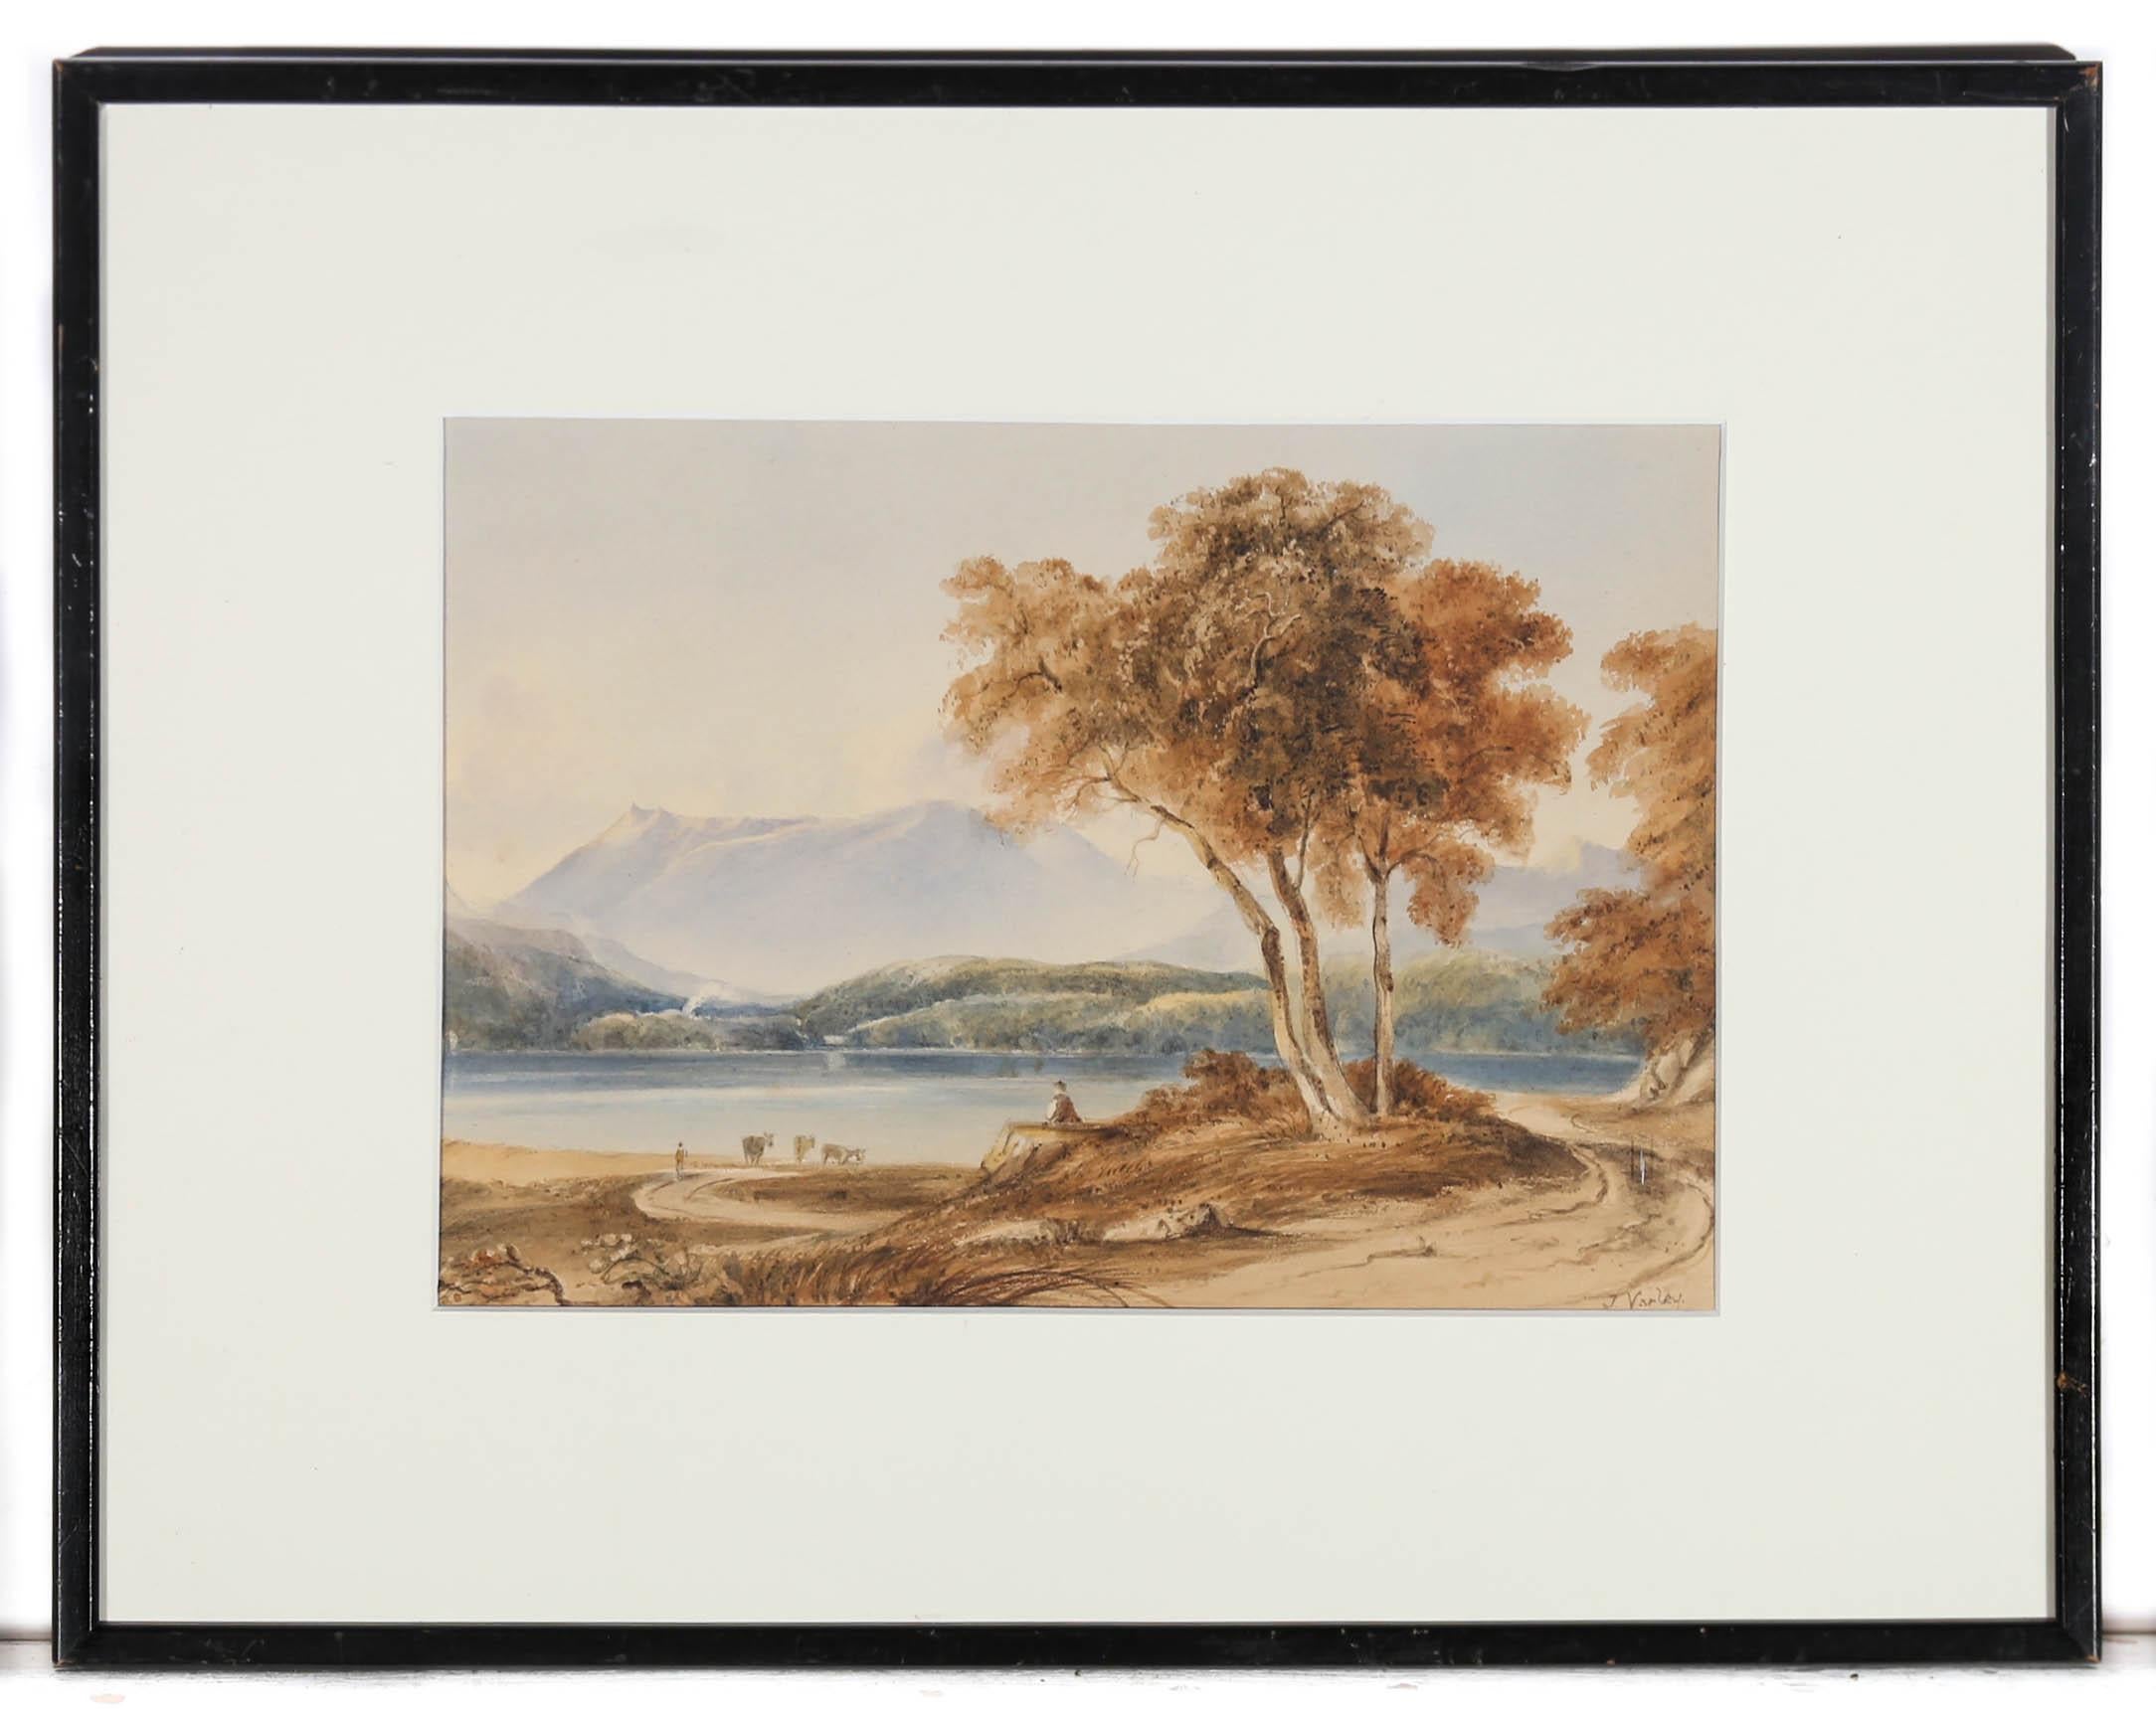 A charming watercolour scene depicting a mountain lake with cattle in the shallow water. the artist captures the landscape in fine detail from the foreground foliage to the distant mountain tops. Signed to the lower right. Presented in a